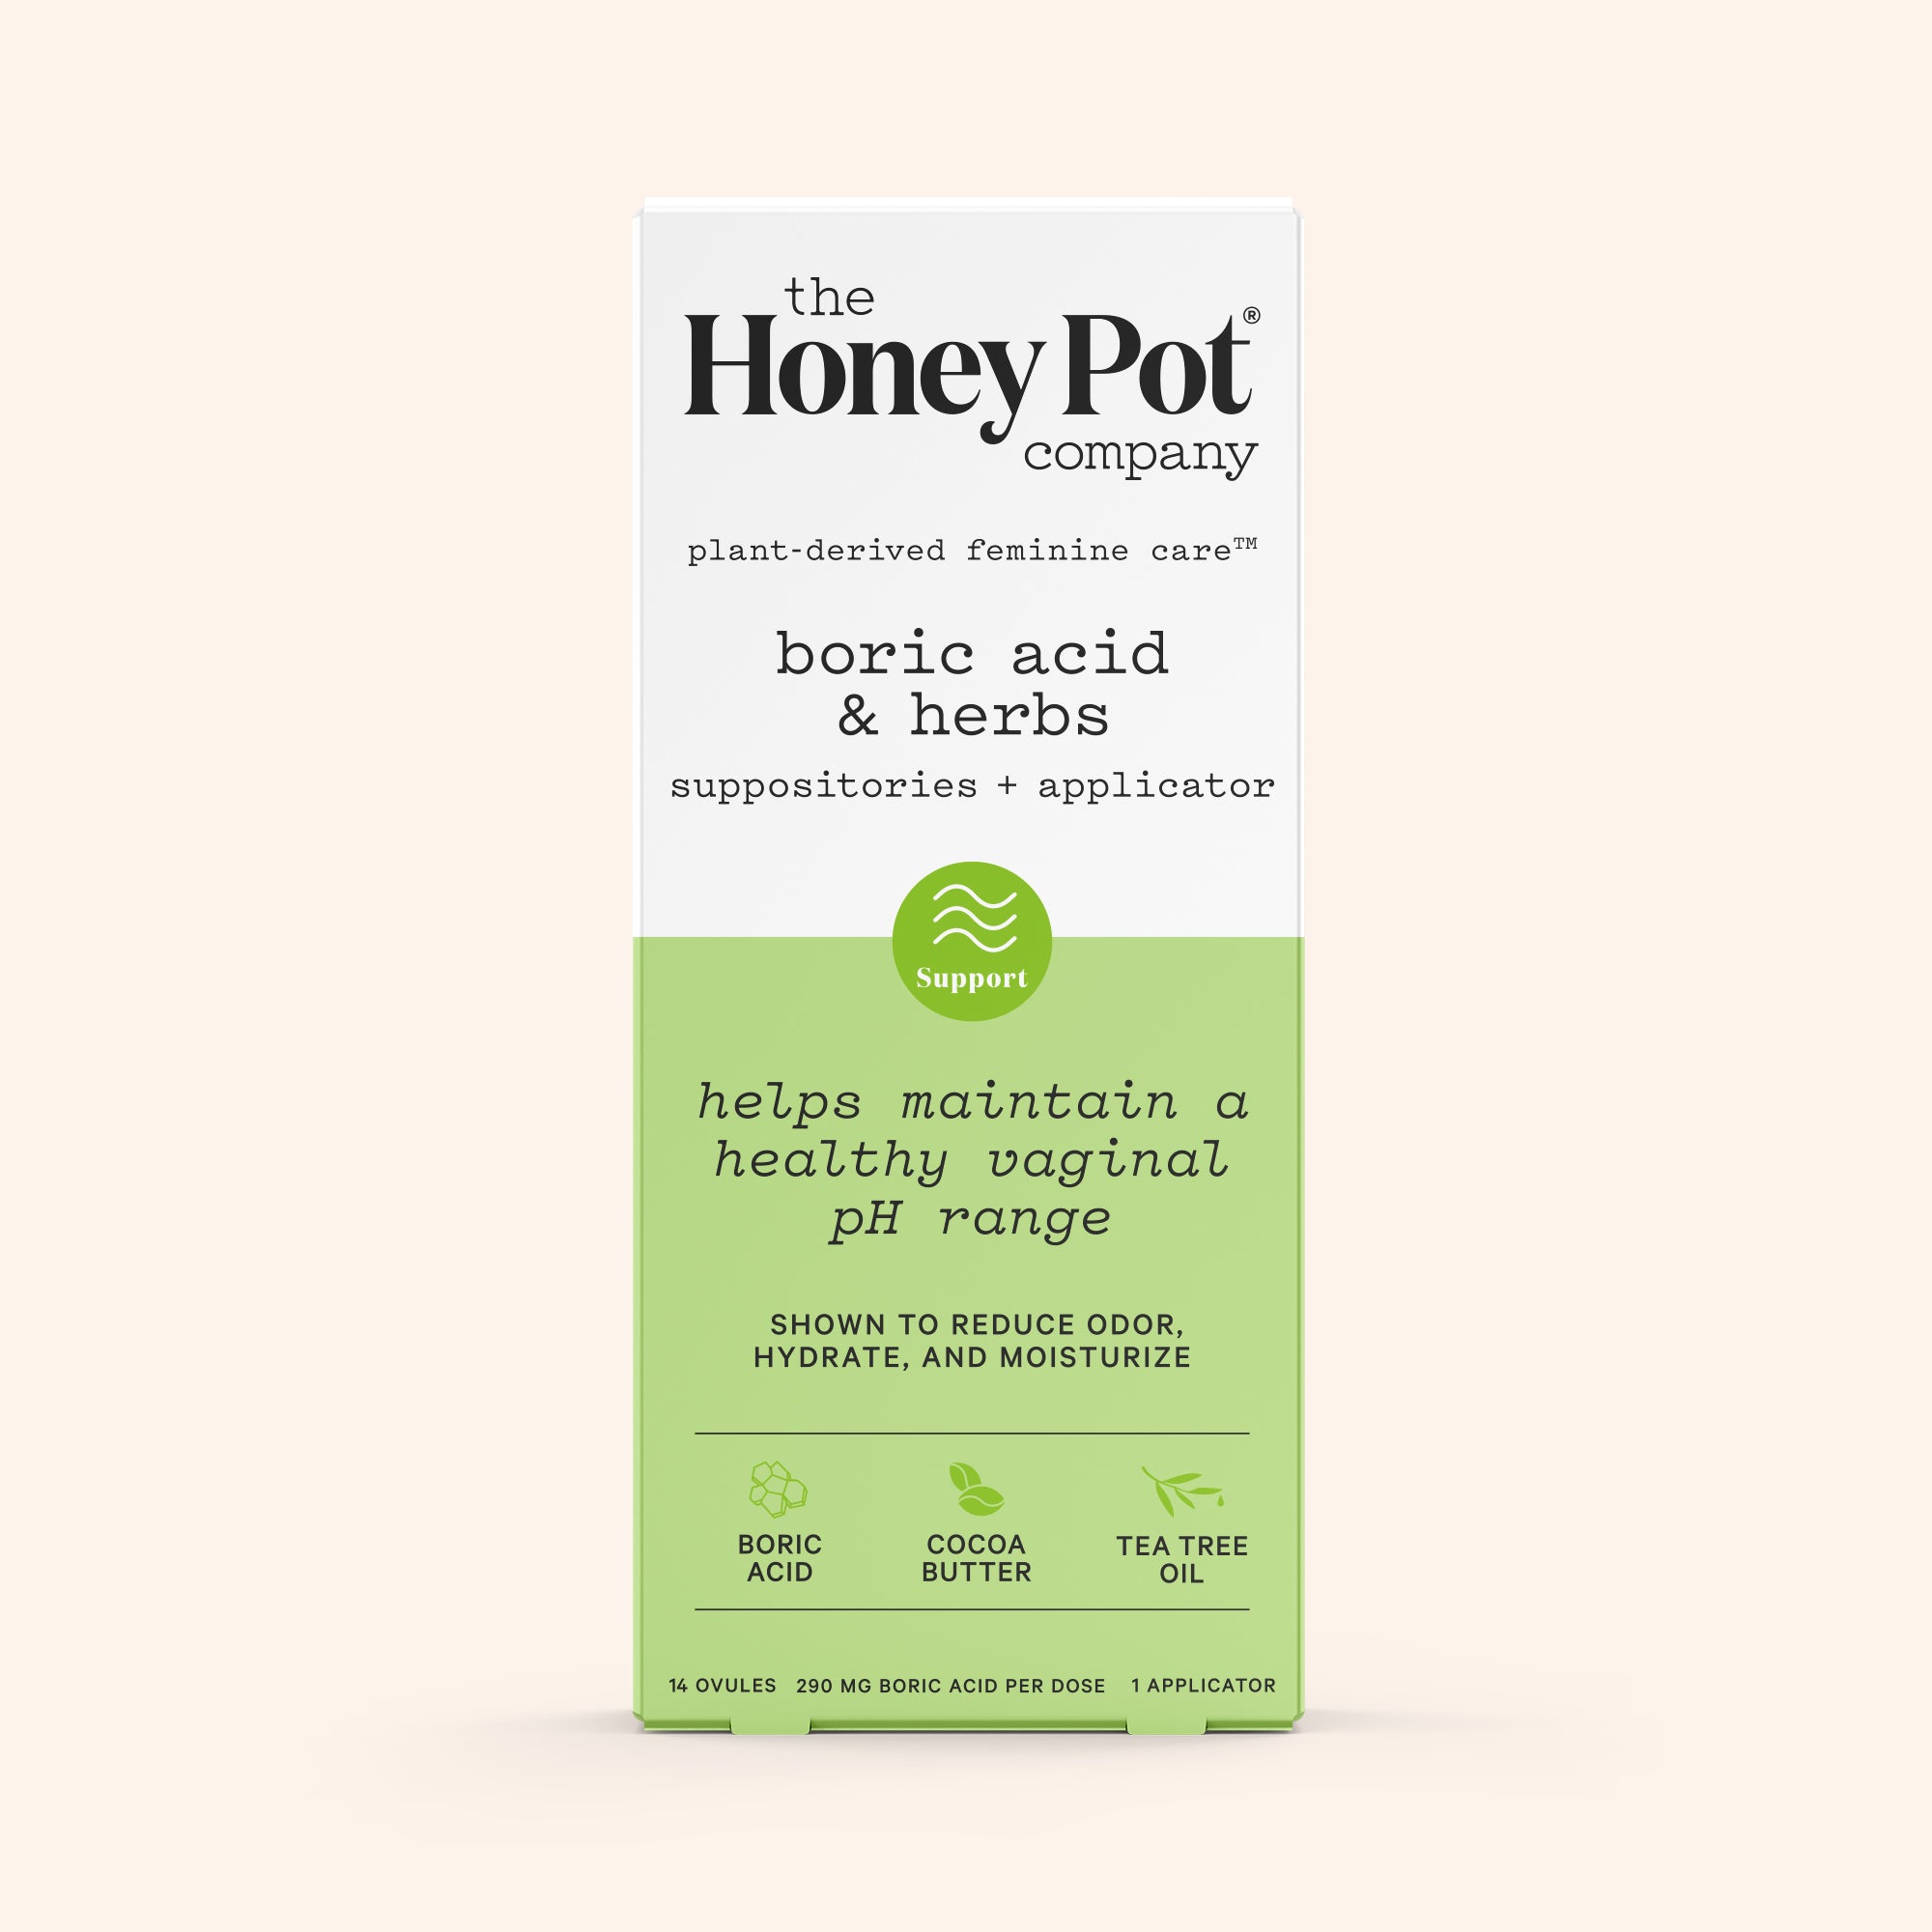 Honey Pot Boric Acid Vaginal Suppositories for pH Balance picture image